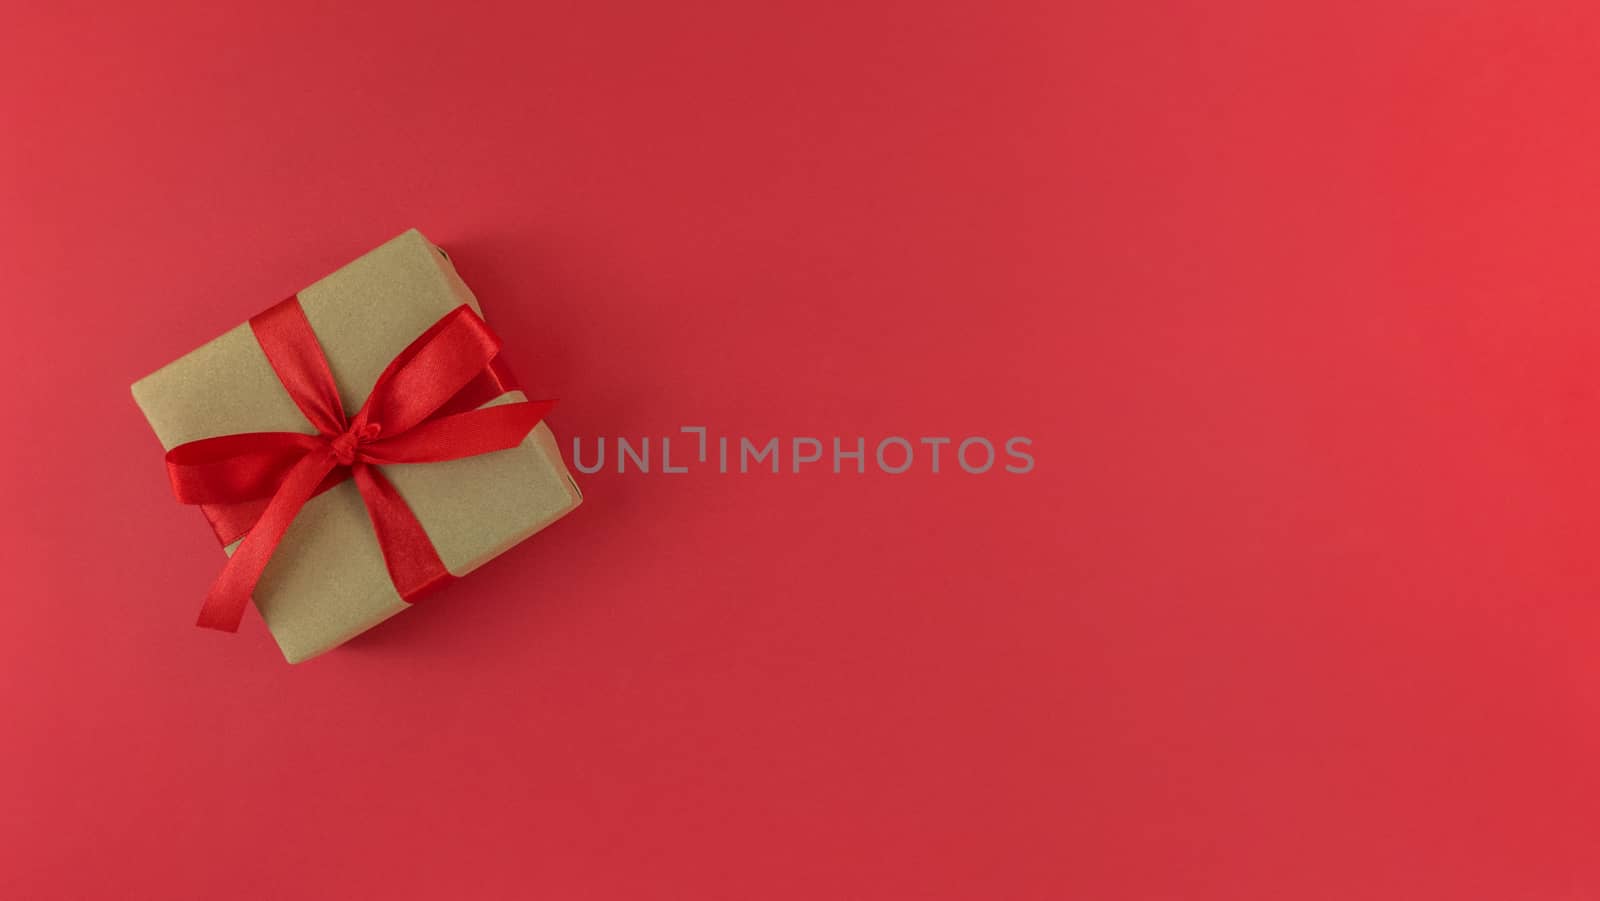 Gift box wrapped in craft paper with red ribbon and bow on red background. Monochrome festive flat lay with copy space.